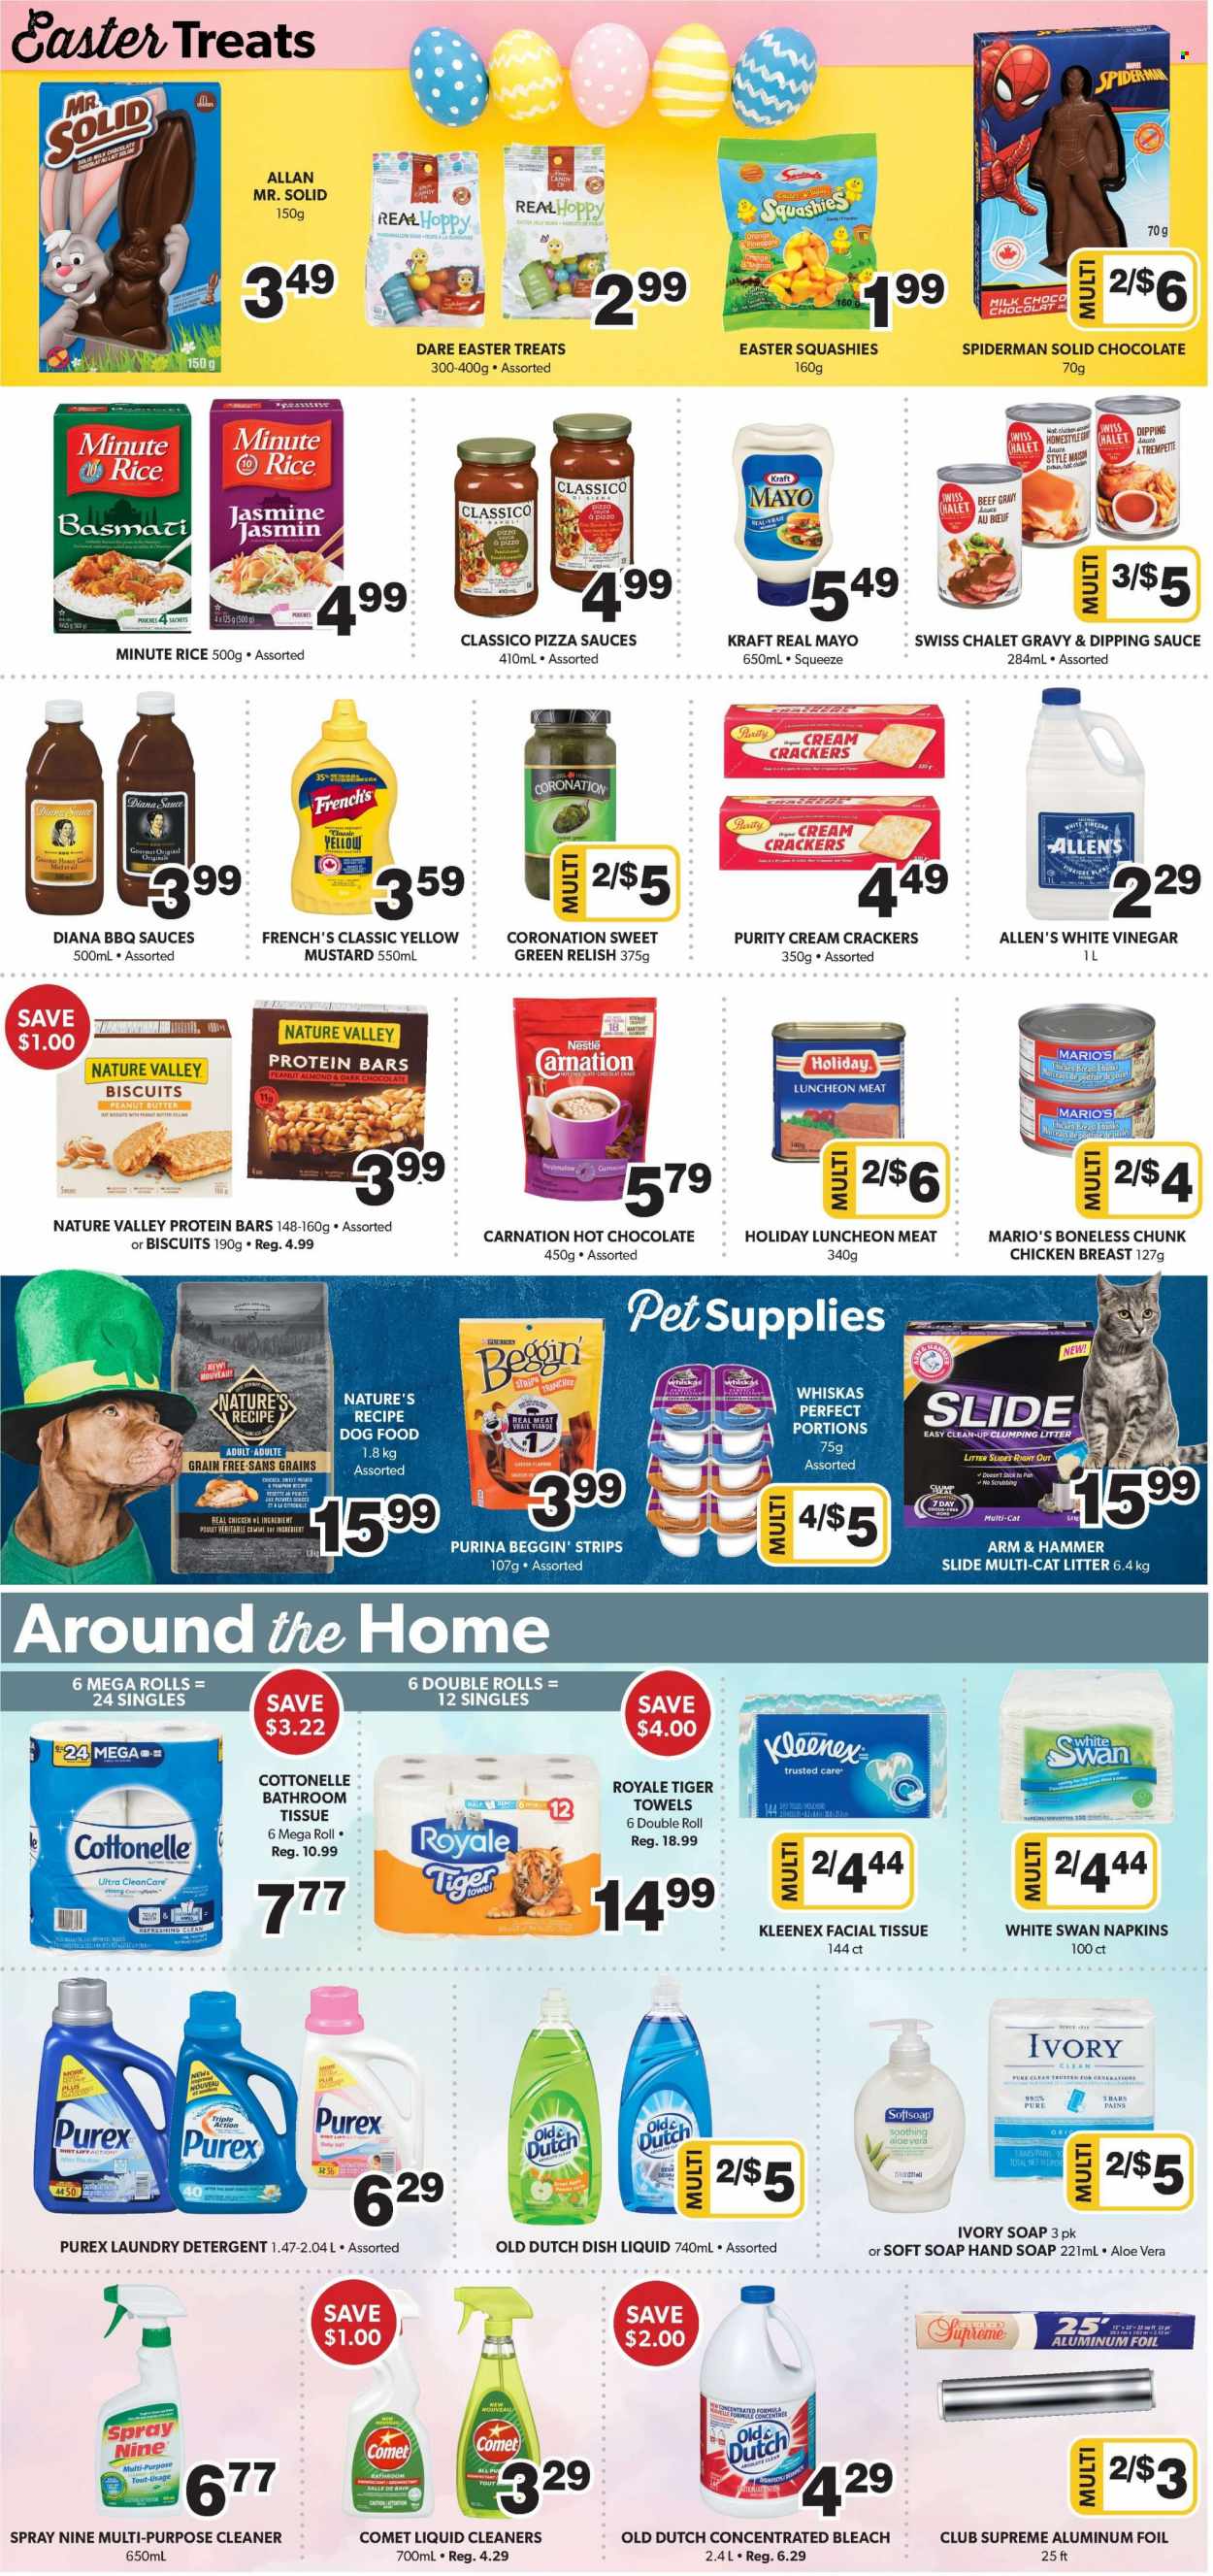 thumbnail - Colemans Flyer - March 16, 2023 - March 22, 2023 - Sales products - garlic, pineapple, oranges, beef gravy, Kraft®, lunch meat, eggs, mayonnaise, strips, marshmallows, milk chocolate, crackers, biscuit, dark chocolate, jelly beans, ARM & HAMMER, protein bar, Nature Valley, basmati rice, rice, BBQ sauce, mustard, Classico, vinegar, honey, peanut butter, hot chocolate, Purity, chicken breasts, chicken, napkins, Baby Soft, Spiderman, bath tissue, Cottonelle, Kleenex, toilet paper, cleaner, bleach, laundry detergent, Purex, dishwashing liquid, Softsoap, hand soap, soap, Absolute, detergent, Nestlé, Whiskas, desinfection. Page 4.